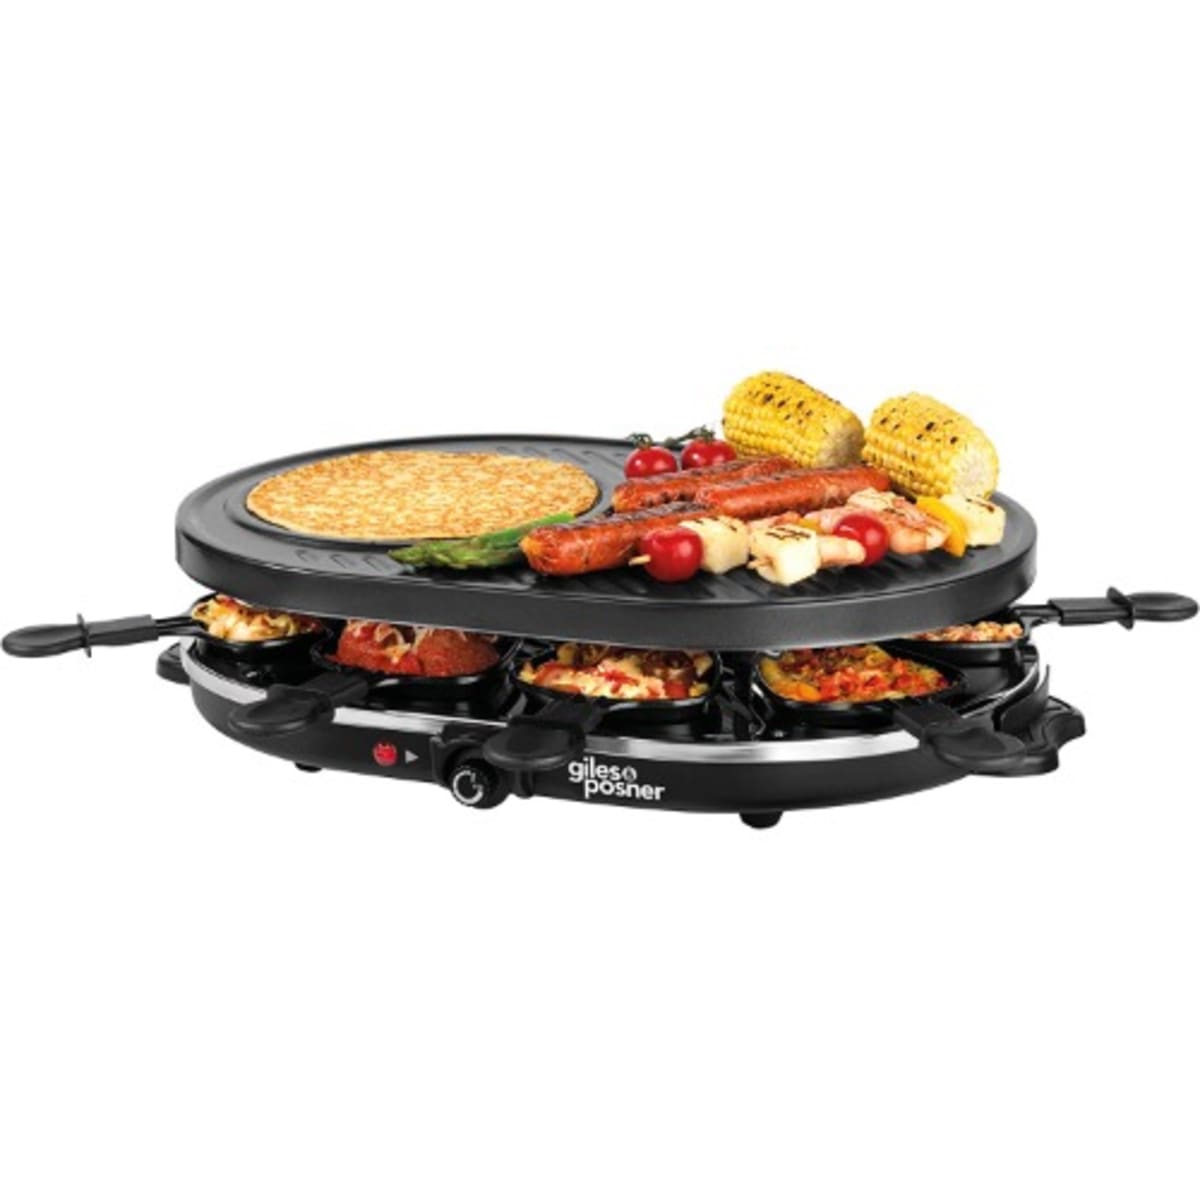 Giles & Posner - Electric Non-stick Raclette Grill And Crepe Maker - 1200W